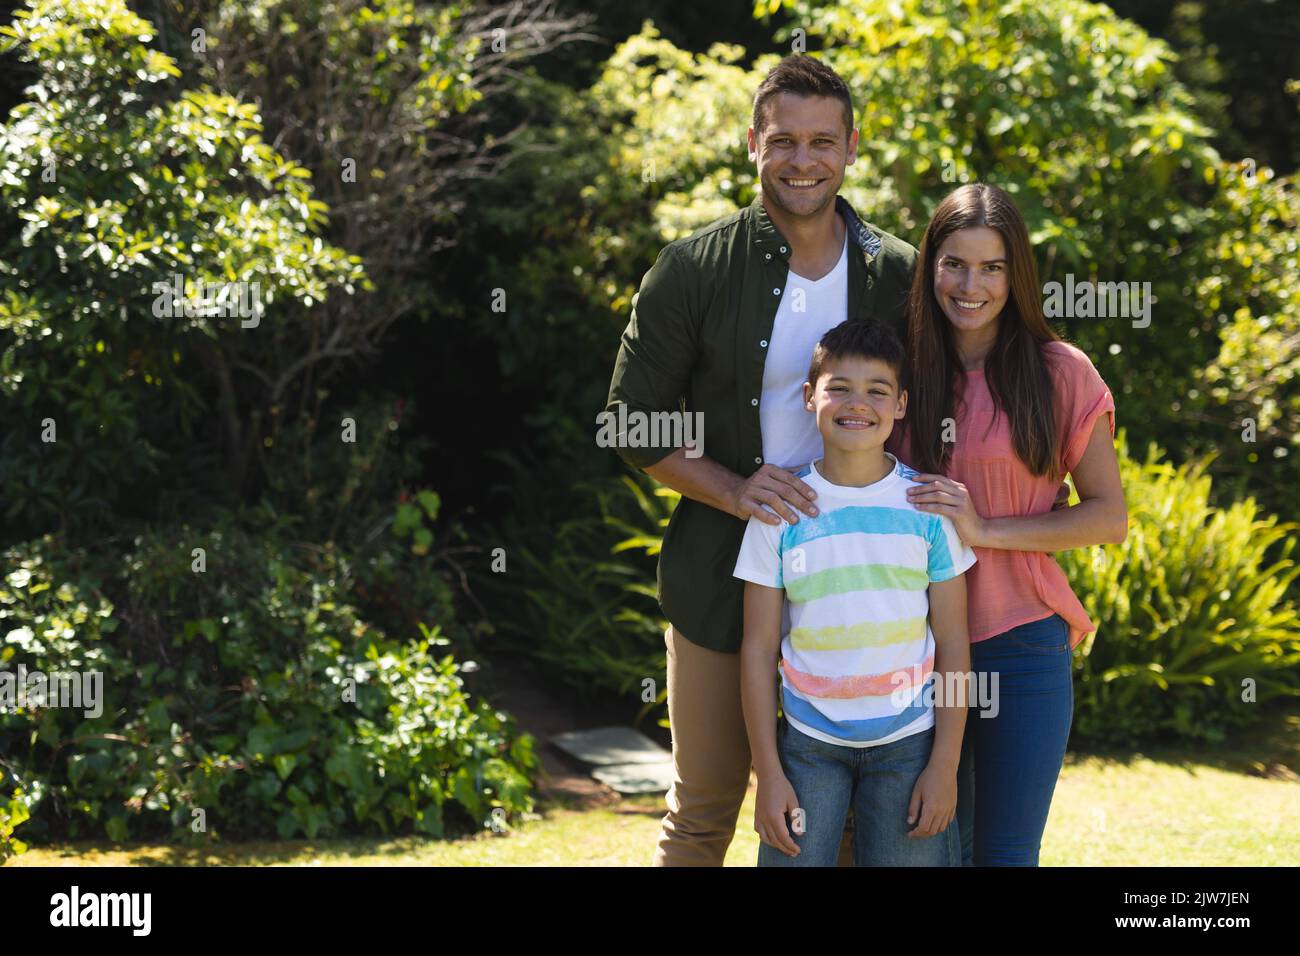 Portrait of caucasian family spending time in their garden together Stock Photo